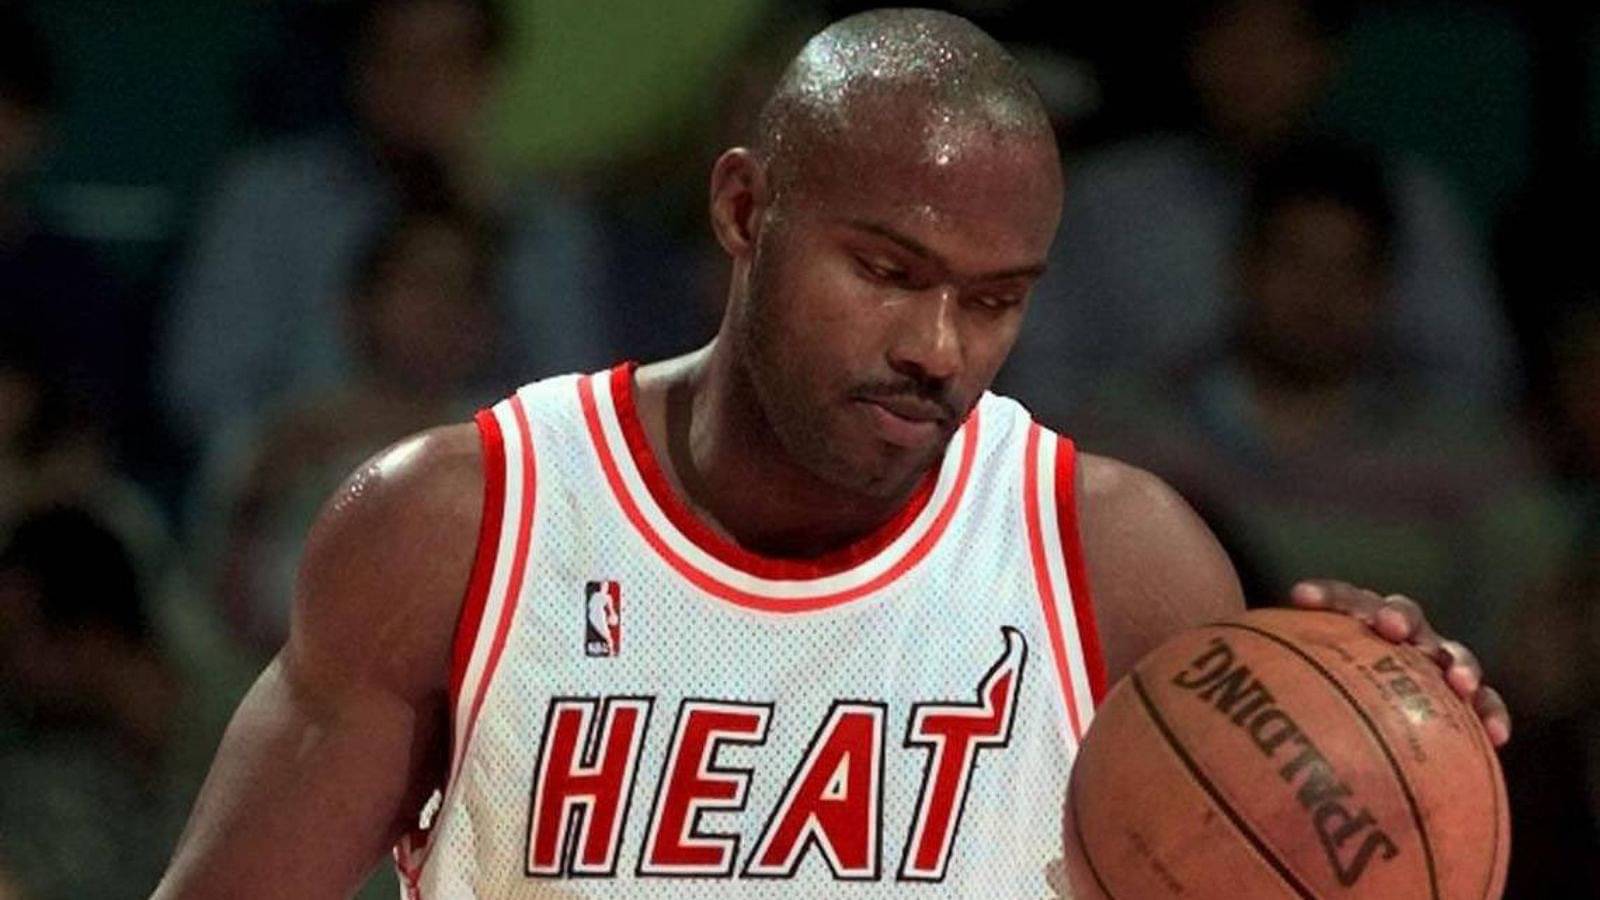 “The reason I’m not in Hall of Fame is because of what I said about gay people”: Tim Hardaway accepted his homophobic remarks in 2007 cost him his place among the legends